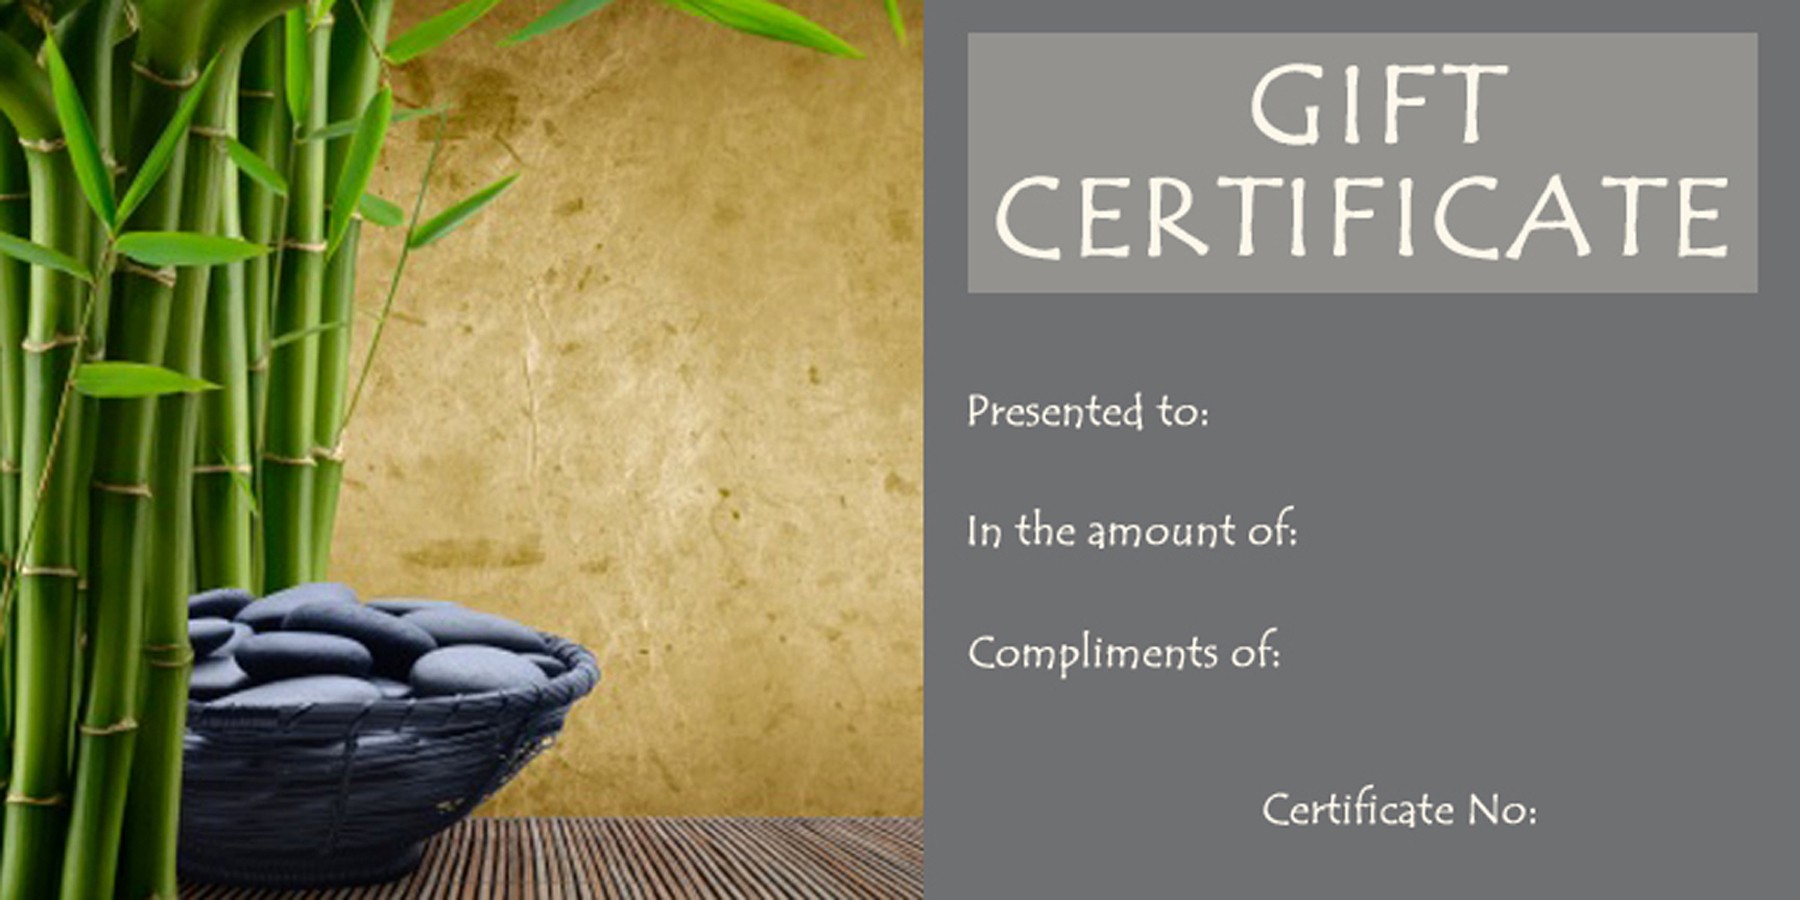 Spa Gift Certificates Templates Free Awesome Psychic Readings asheville Psychic Pet Psychic